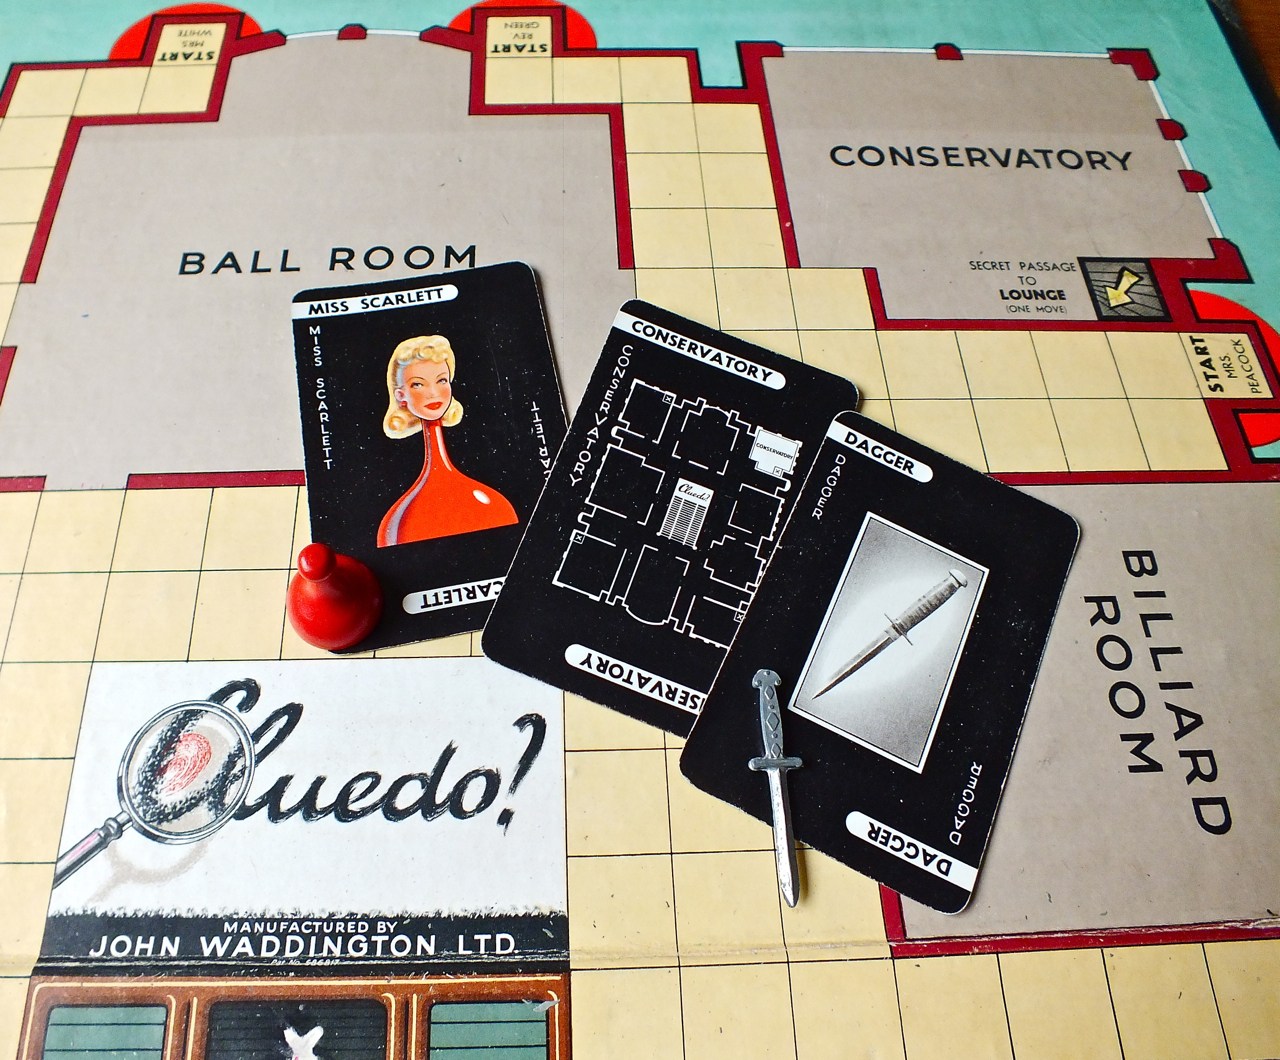 Can You Beat Your BFF in This General Knowledge Quiz? Cluedo, 1949, Waddingtons, first edition; Miss Scarlett in the Conservatory with the Dagger